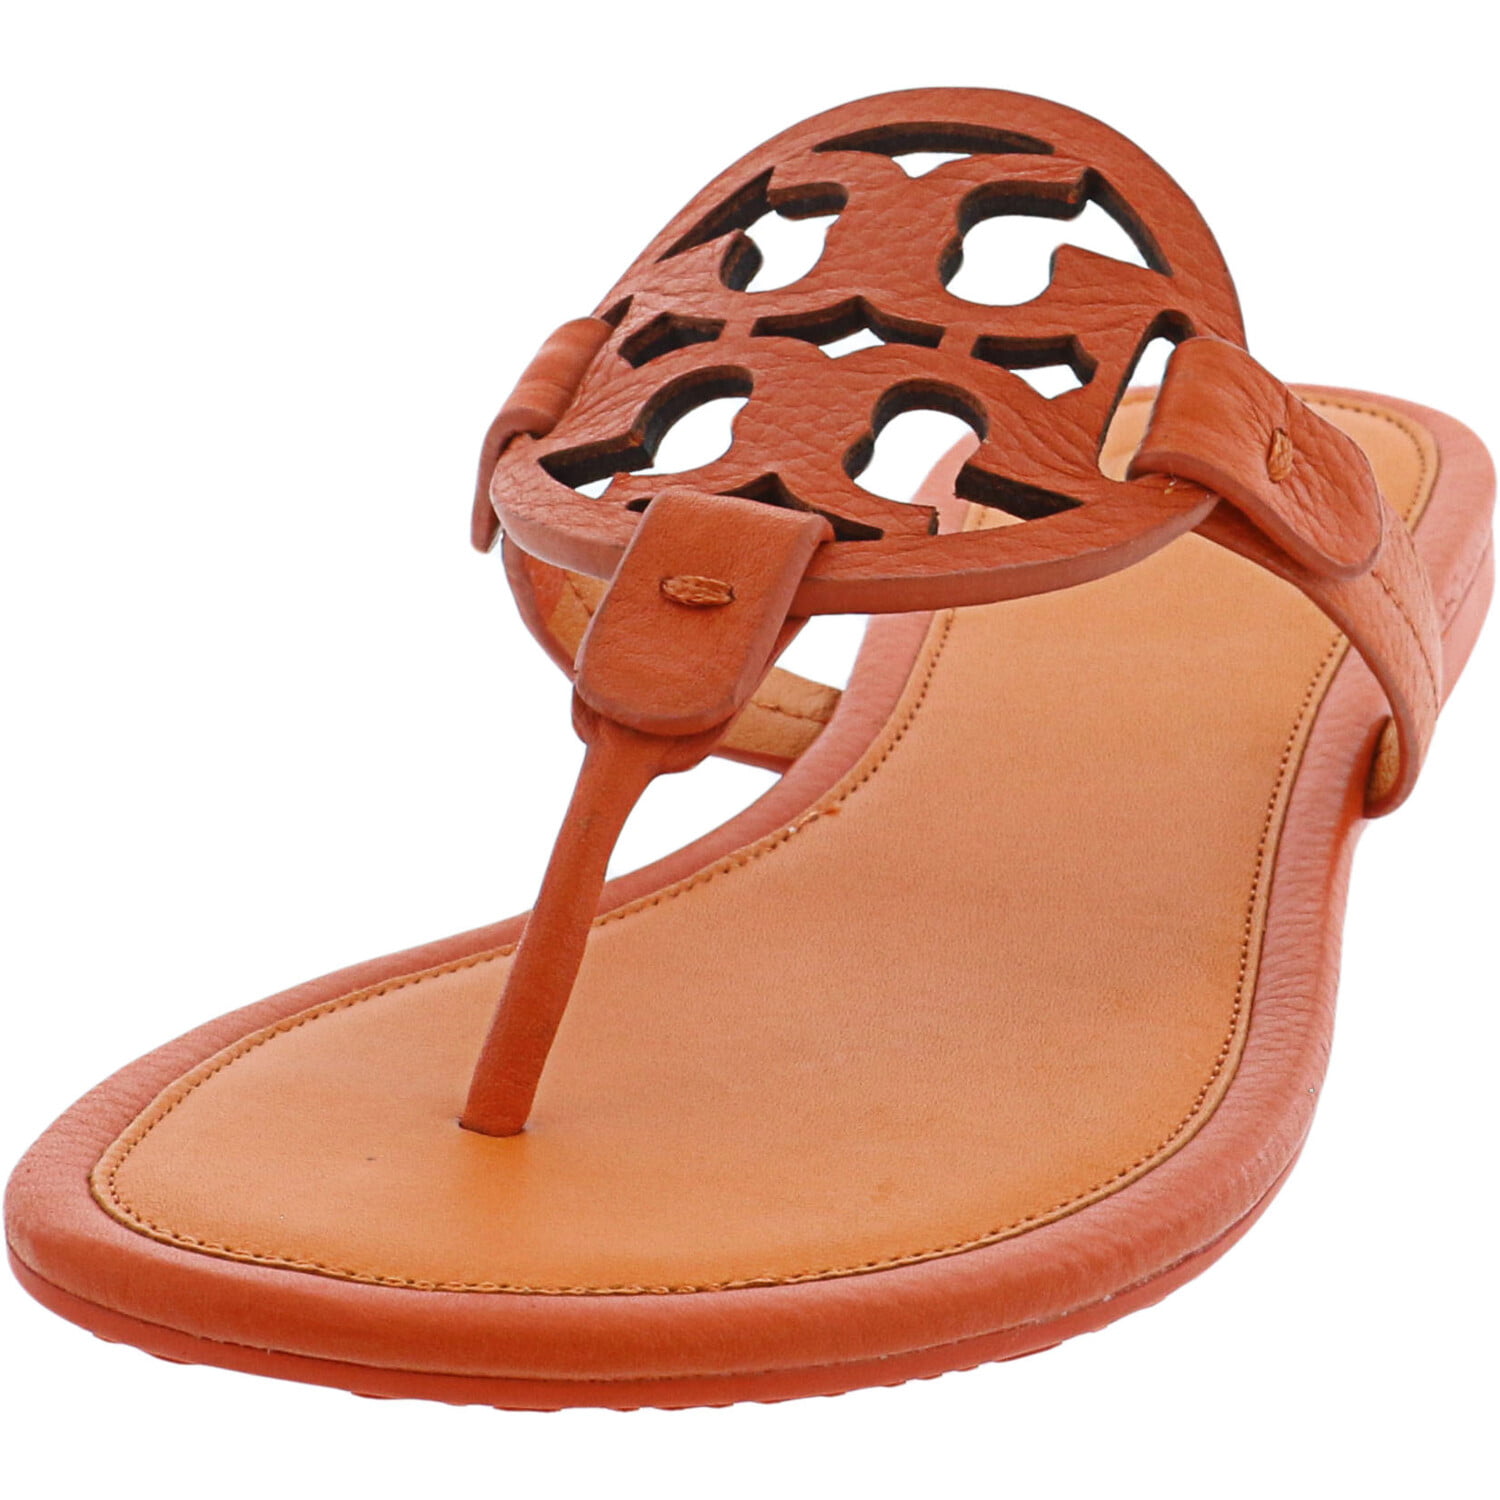 Tory Burch Women's Miller Tumbled Leather Poppy Red / Aragosta Ankle-High  Sandal  